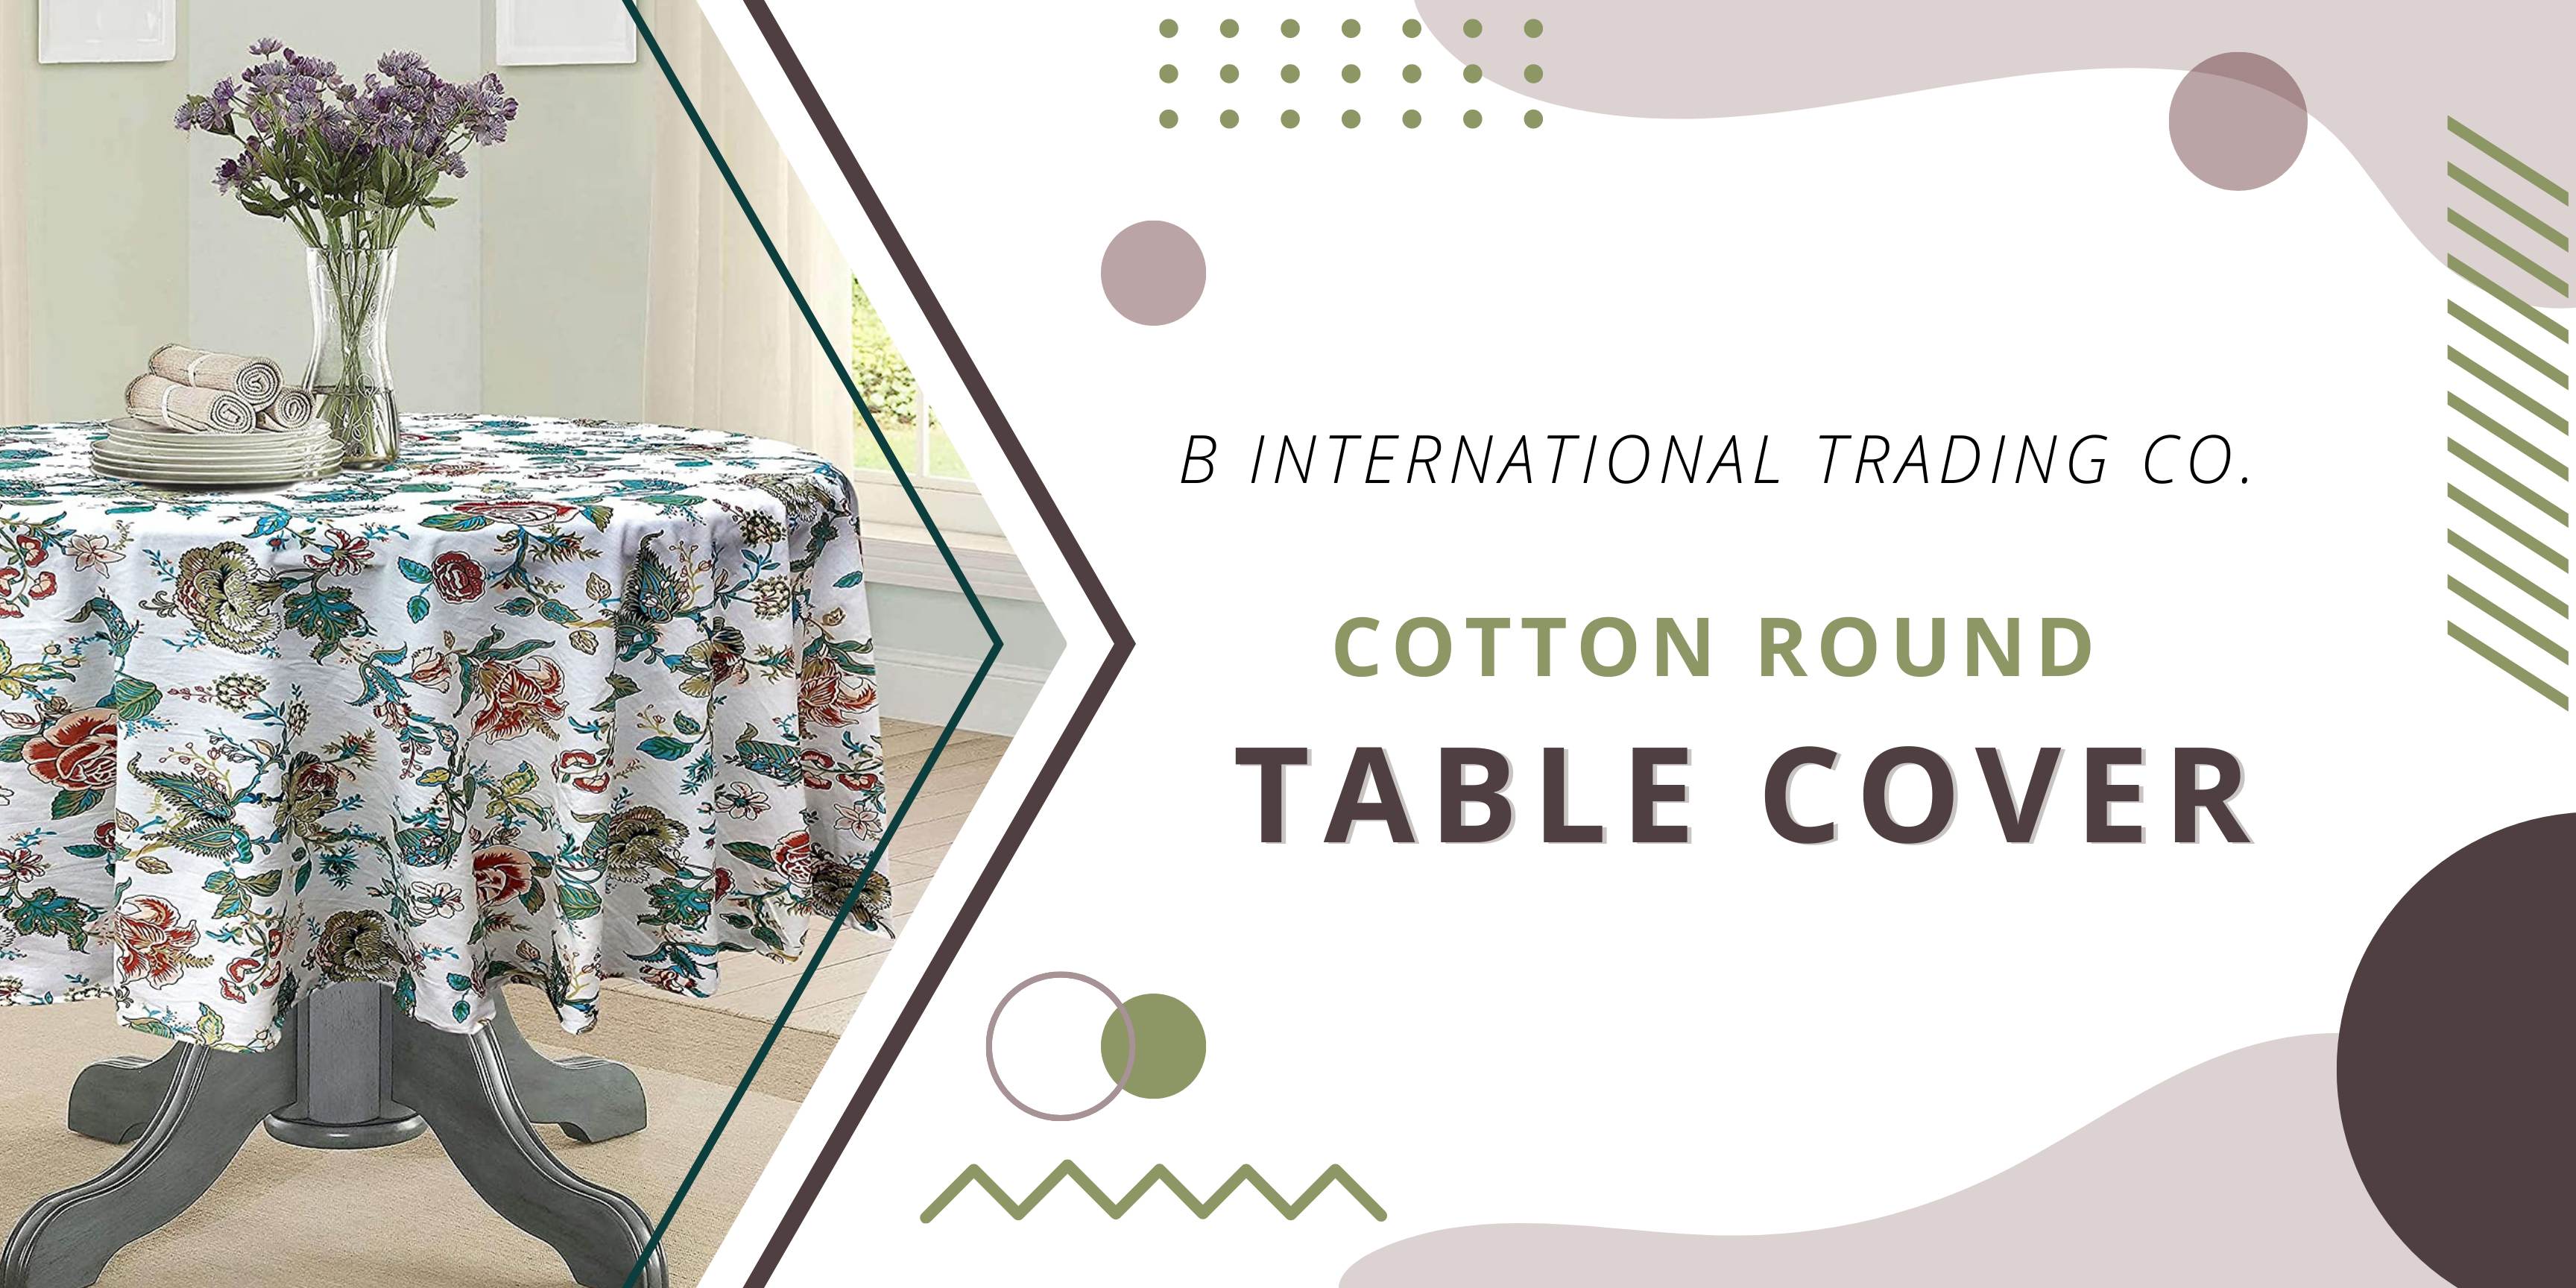 Cotton Round Table Cover